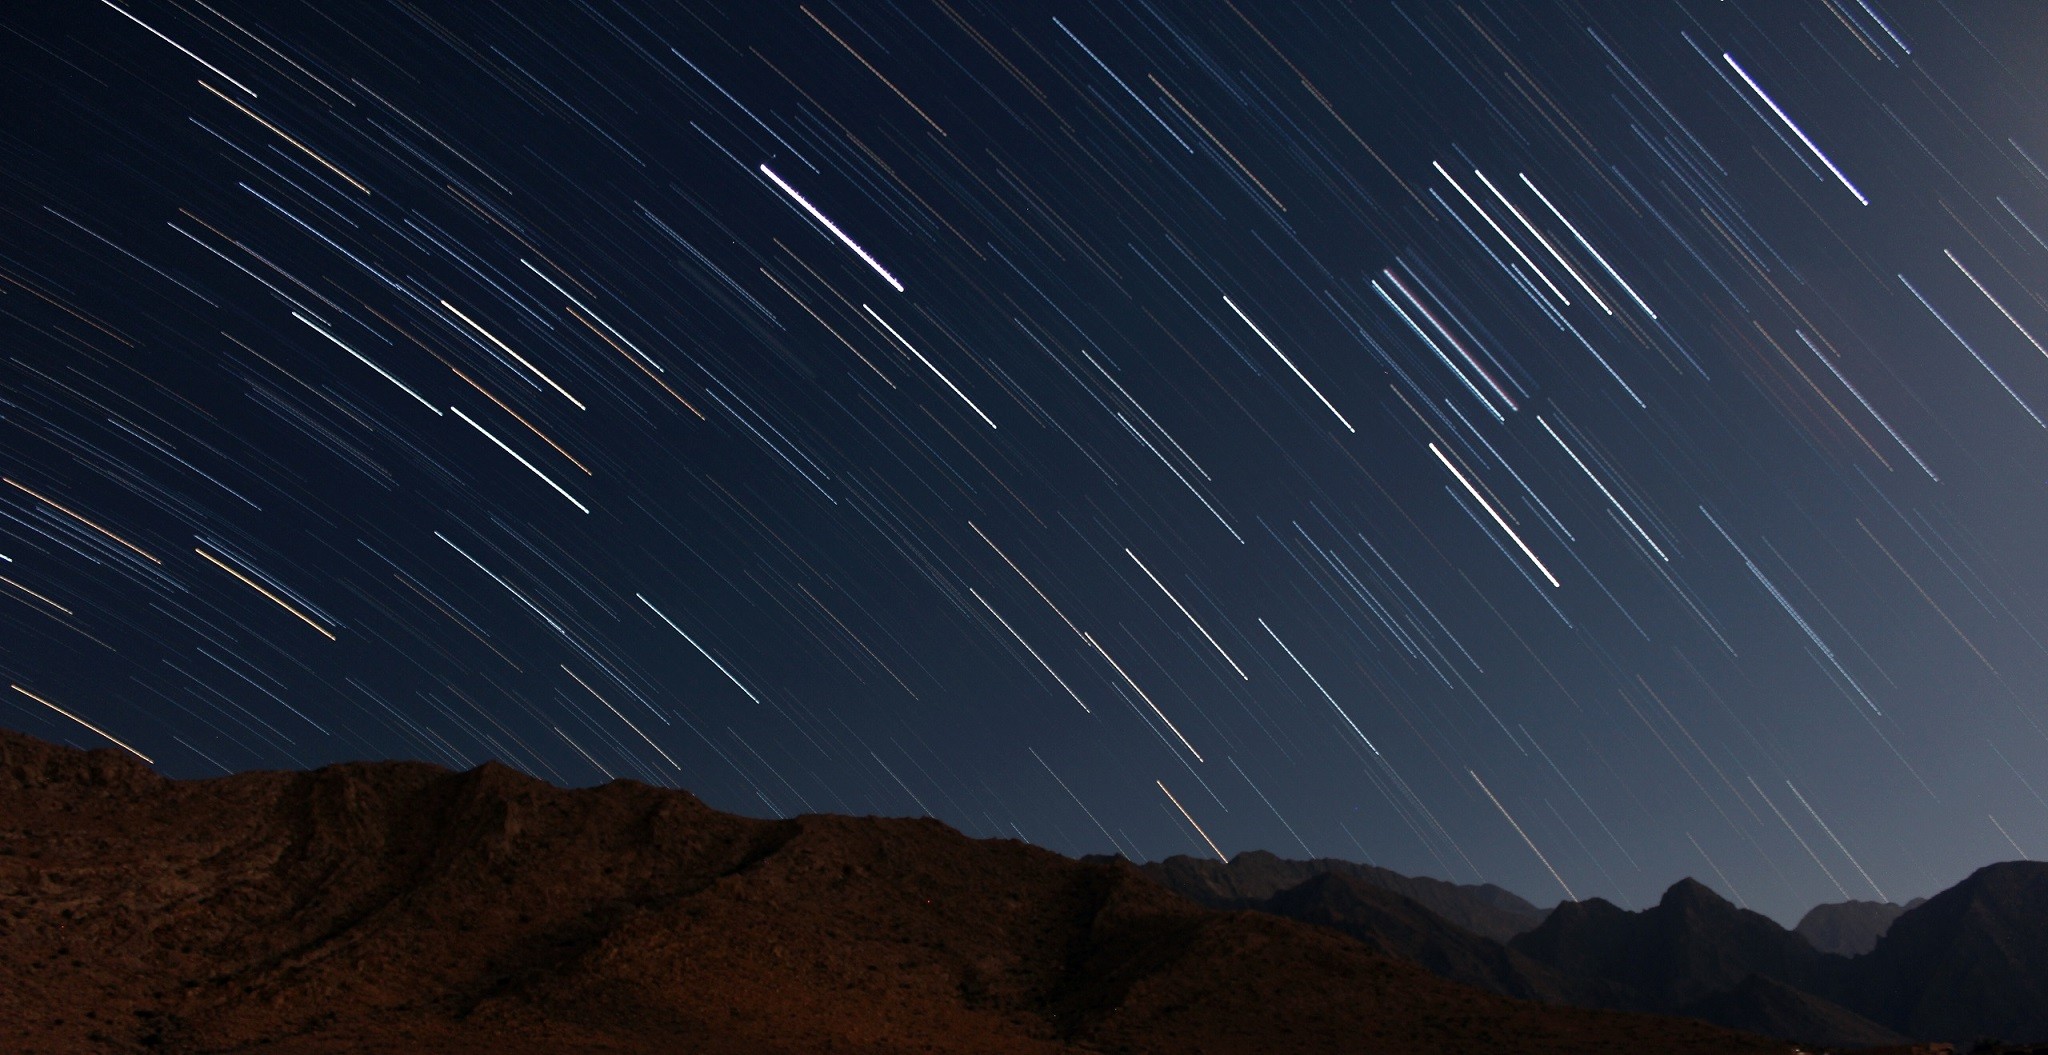 General 2048x1055 night shooting stars mountains landscape long exposure sky nature outdoors star trails